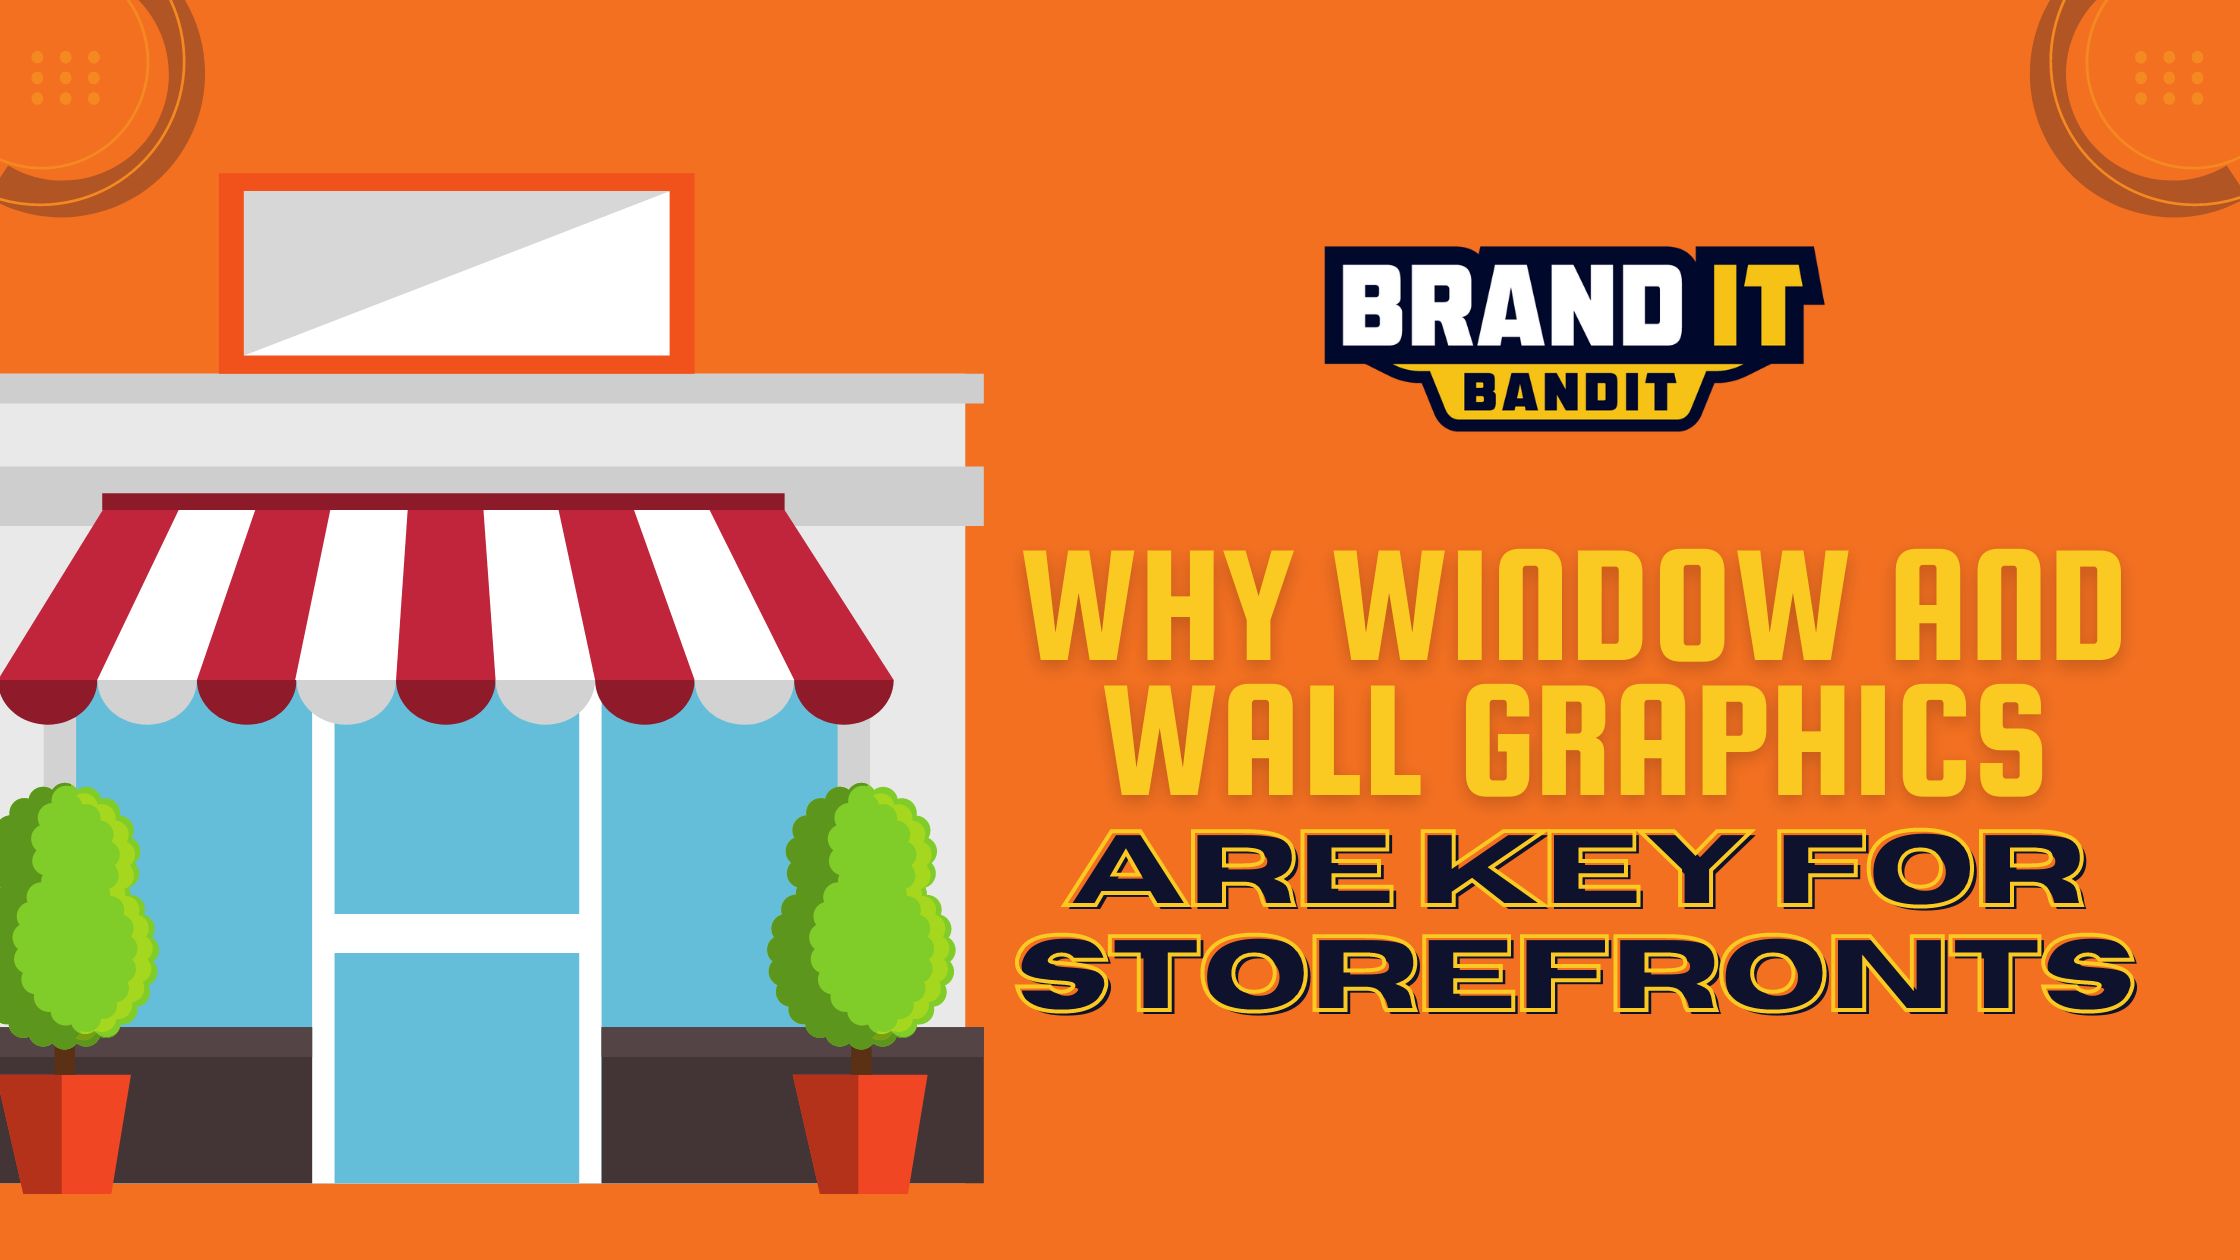 Why Window and Wall Graphics Are Key for Storefronts